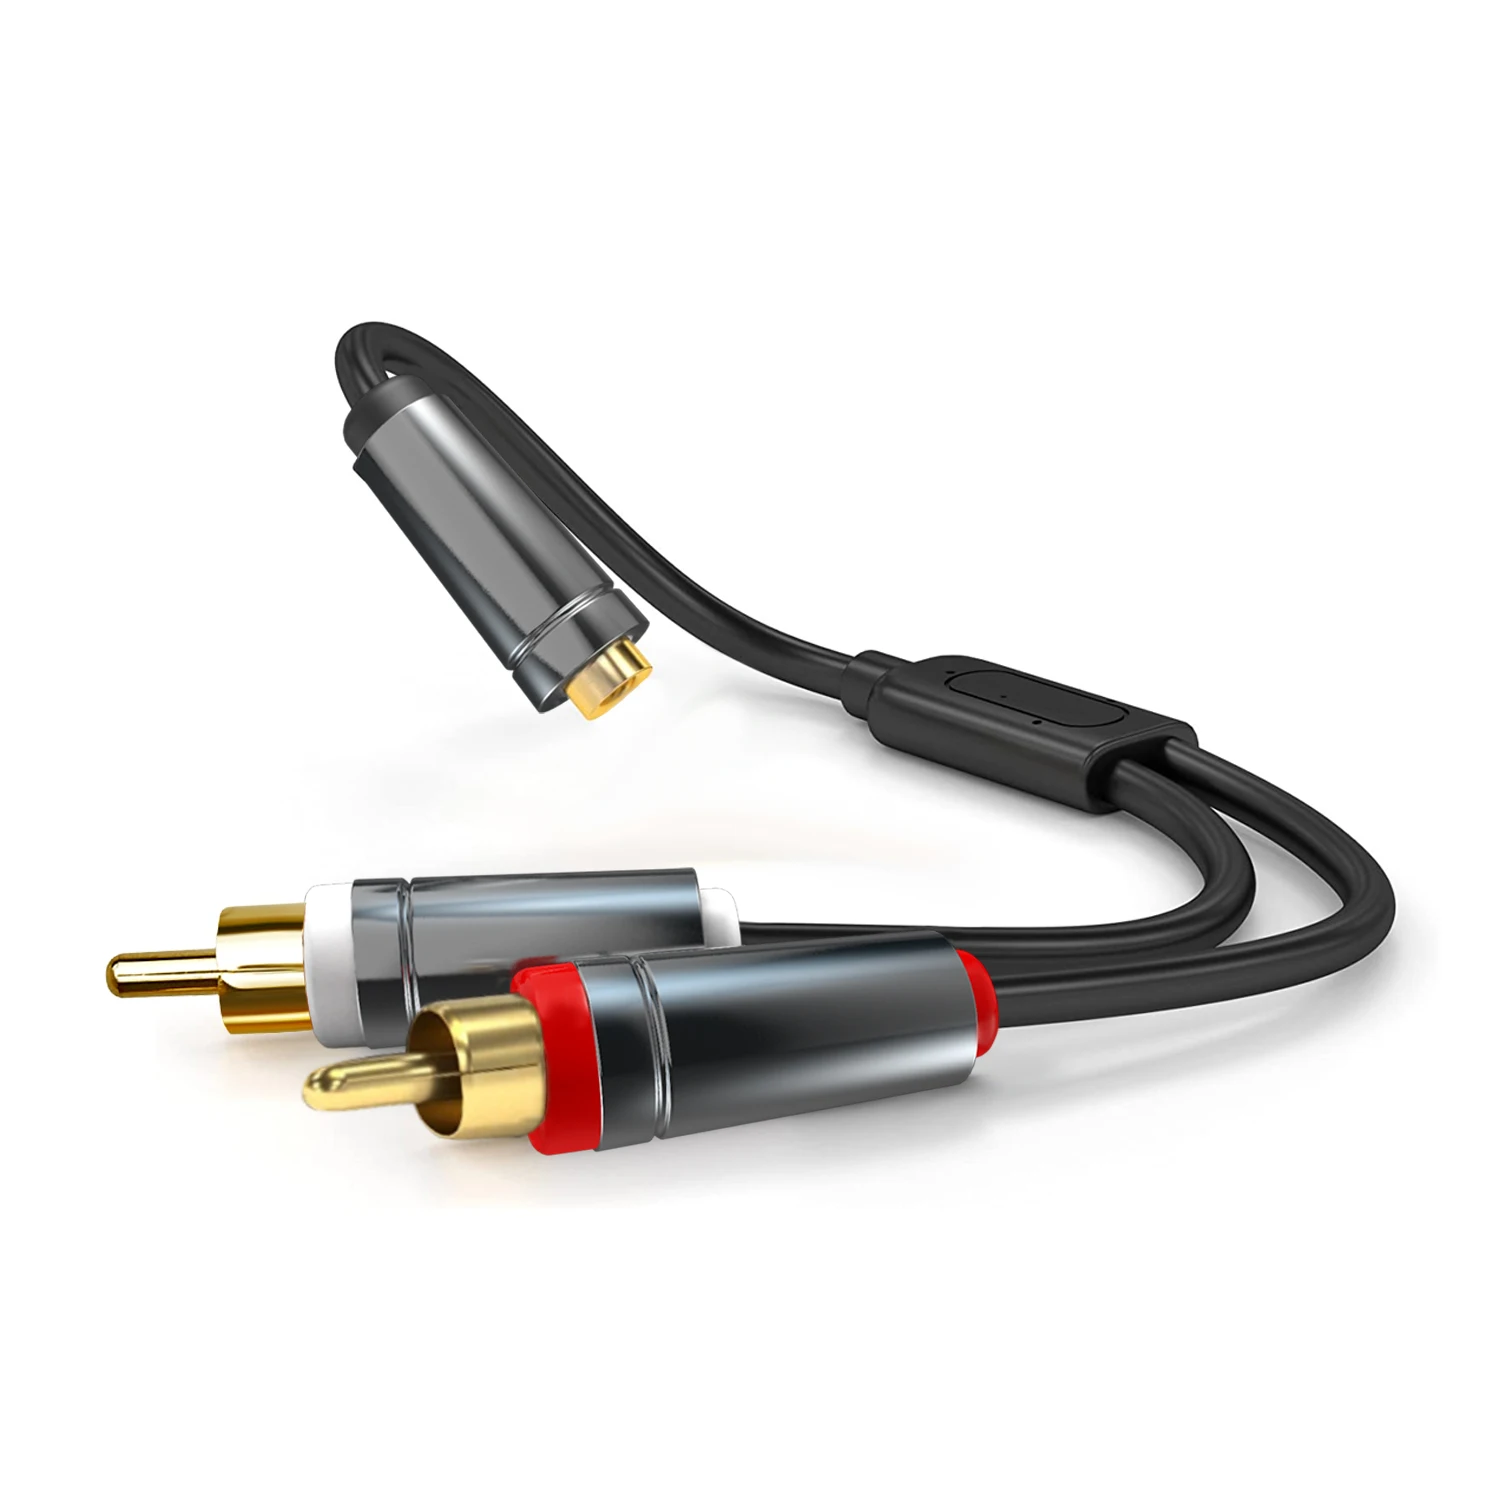 

HI-Q 2RCA 3.5 mm Superior Quality Cabo Price 3.5mm Stereo Audio Cable Female to Male 3.5mm to 2 RCA Y AUX AV Kabel